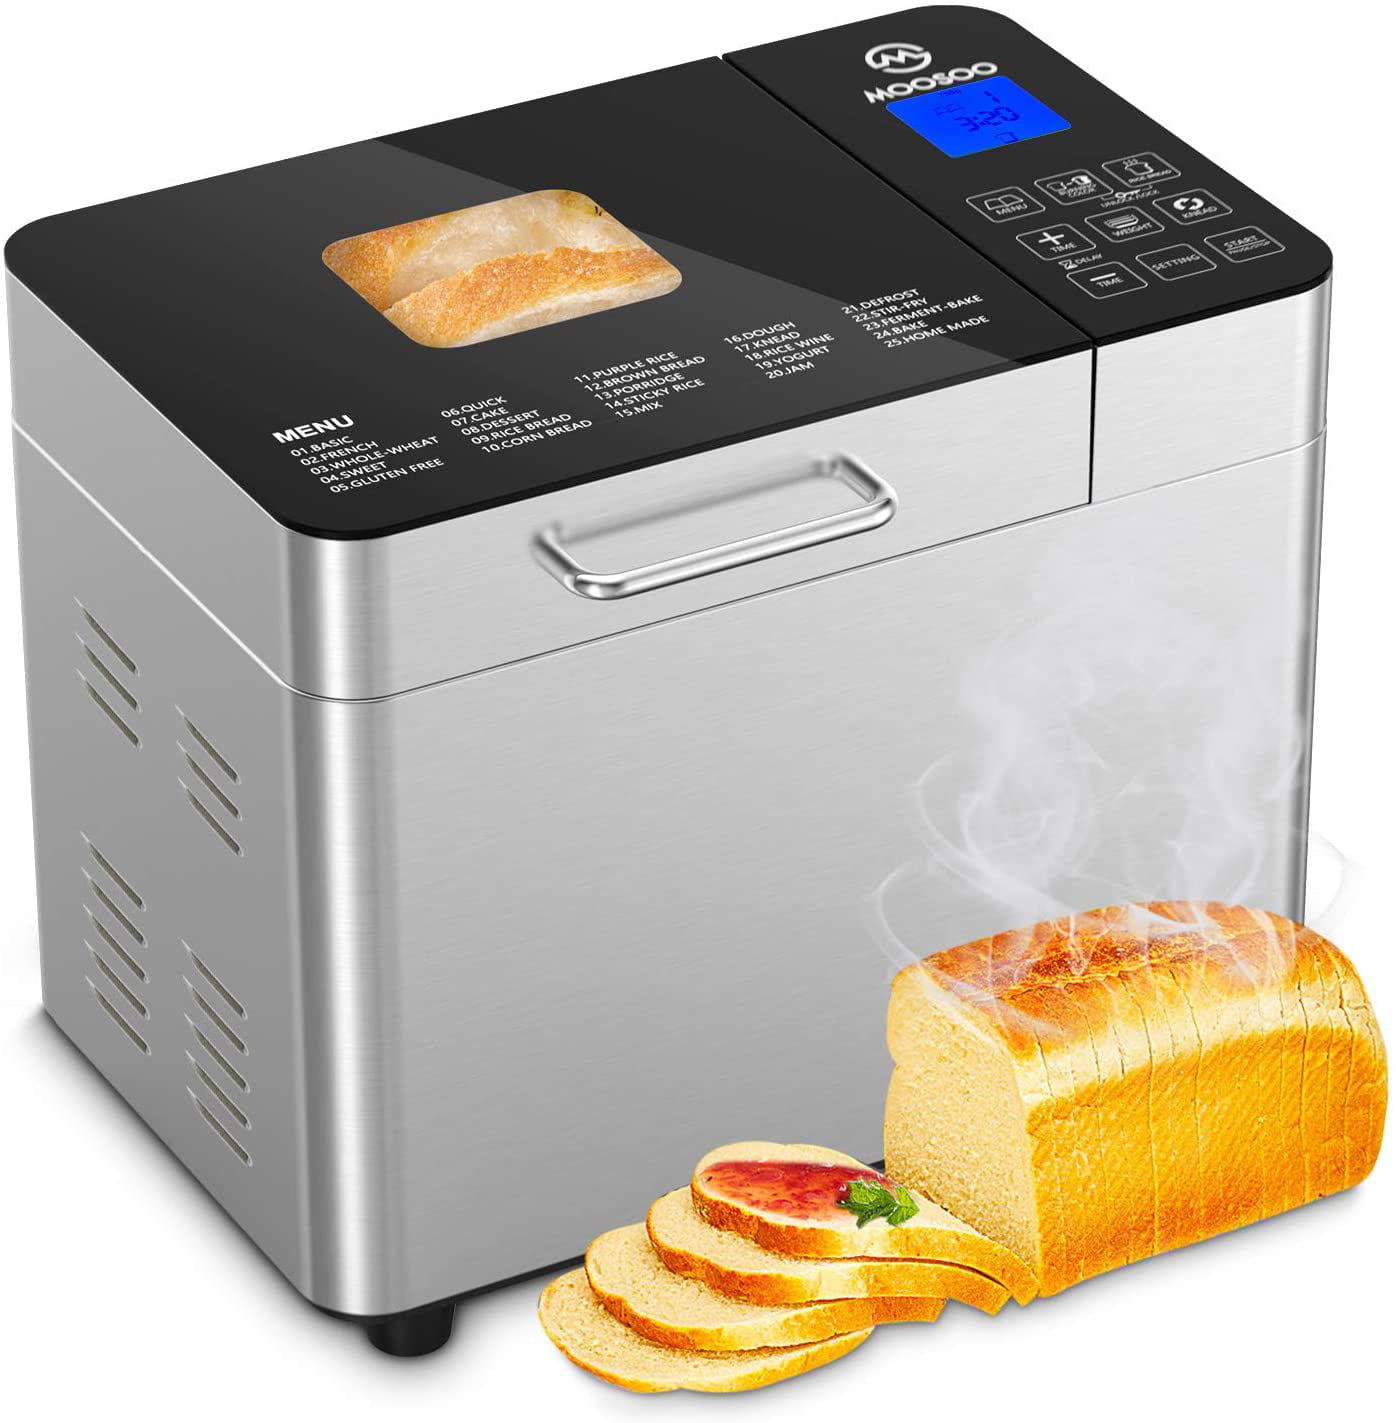 Razorri 2 lbs. 25-in-1 Stainless Steel Automatic Bread Maker with